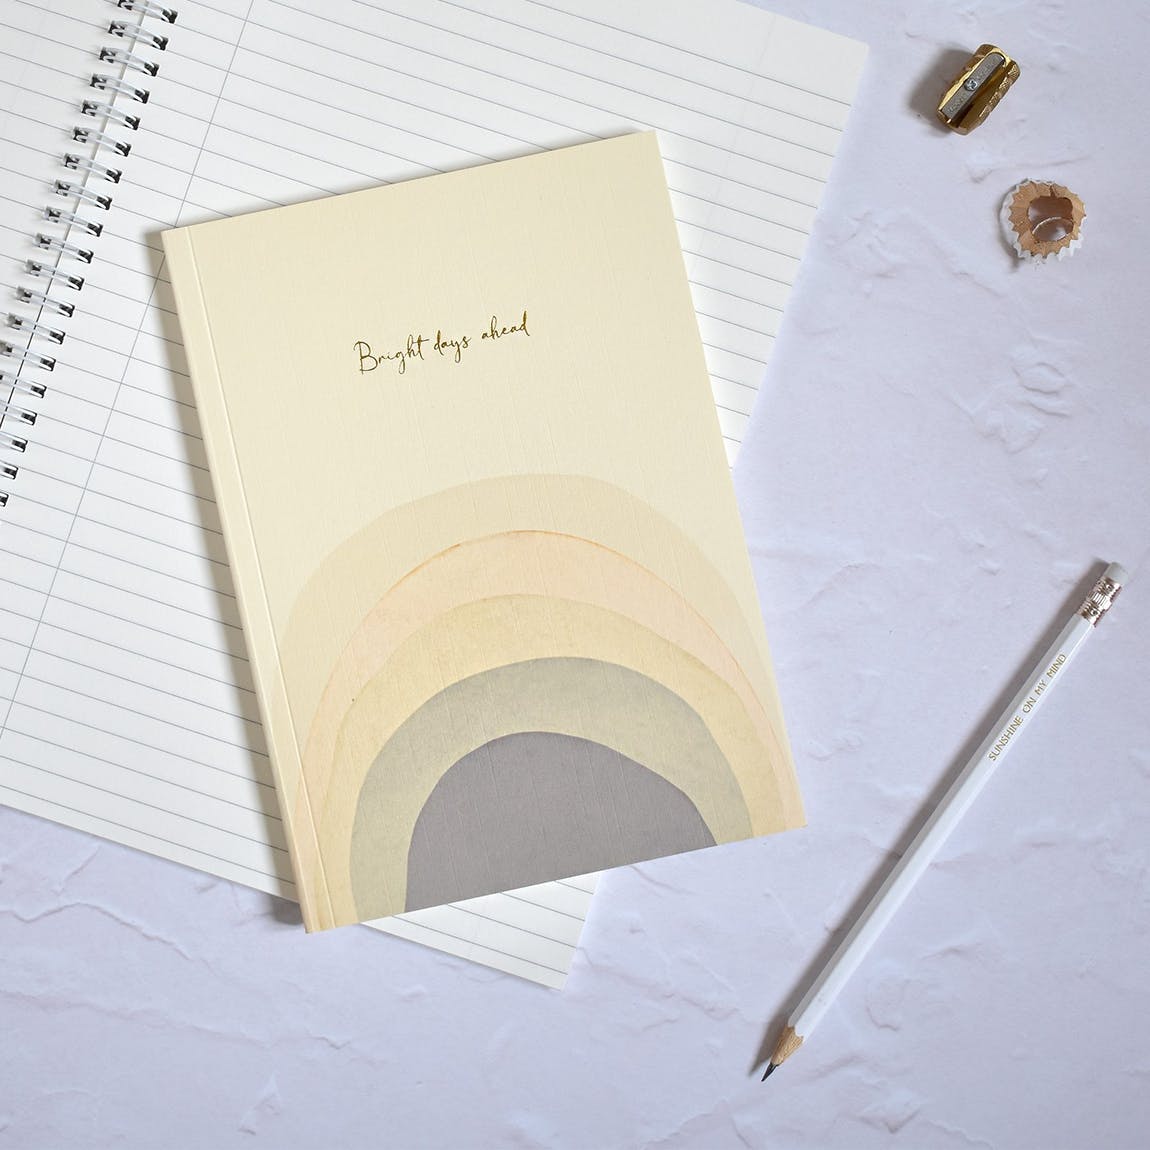 Bright Days Ahead A5 Notebook